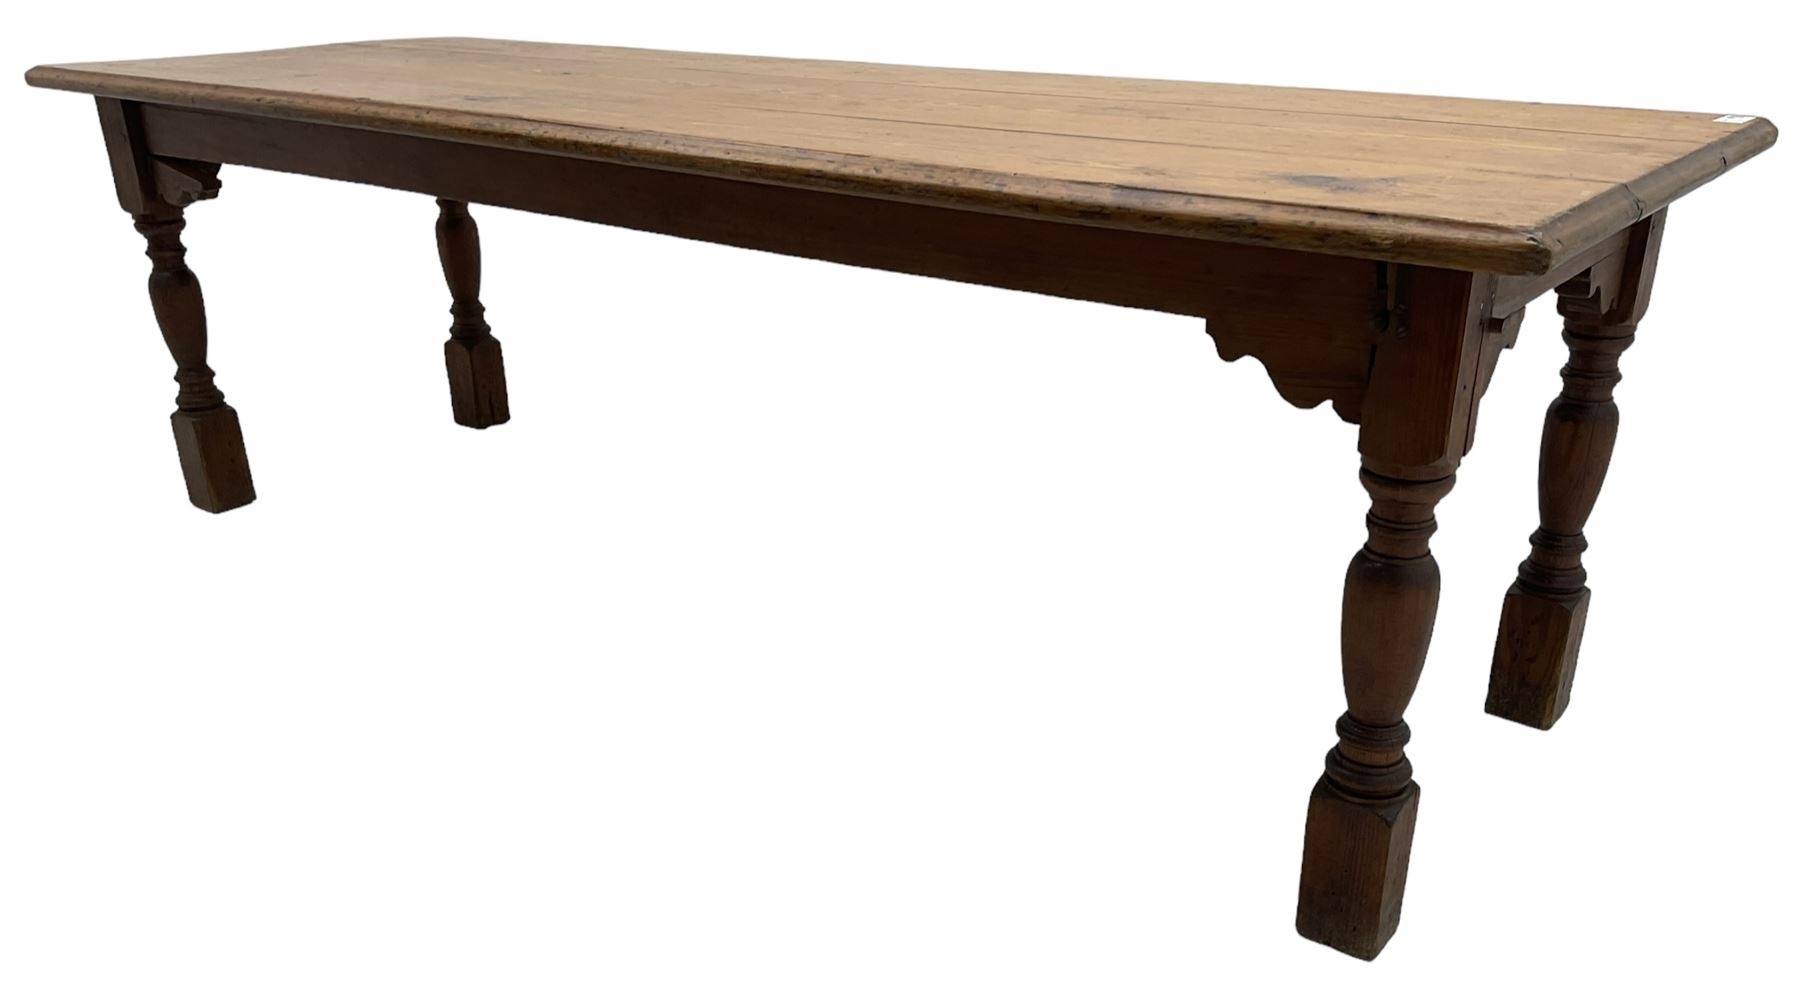 Large Victorian pitch pine farmhouse table - Image 4 of 6